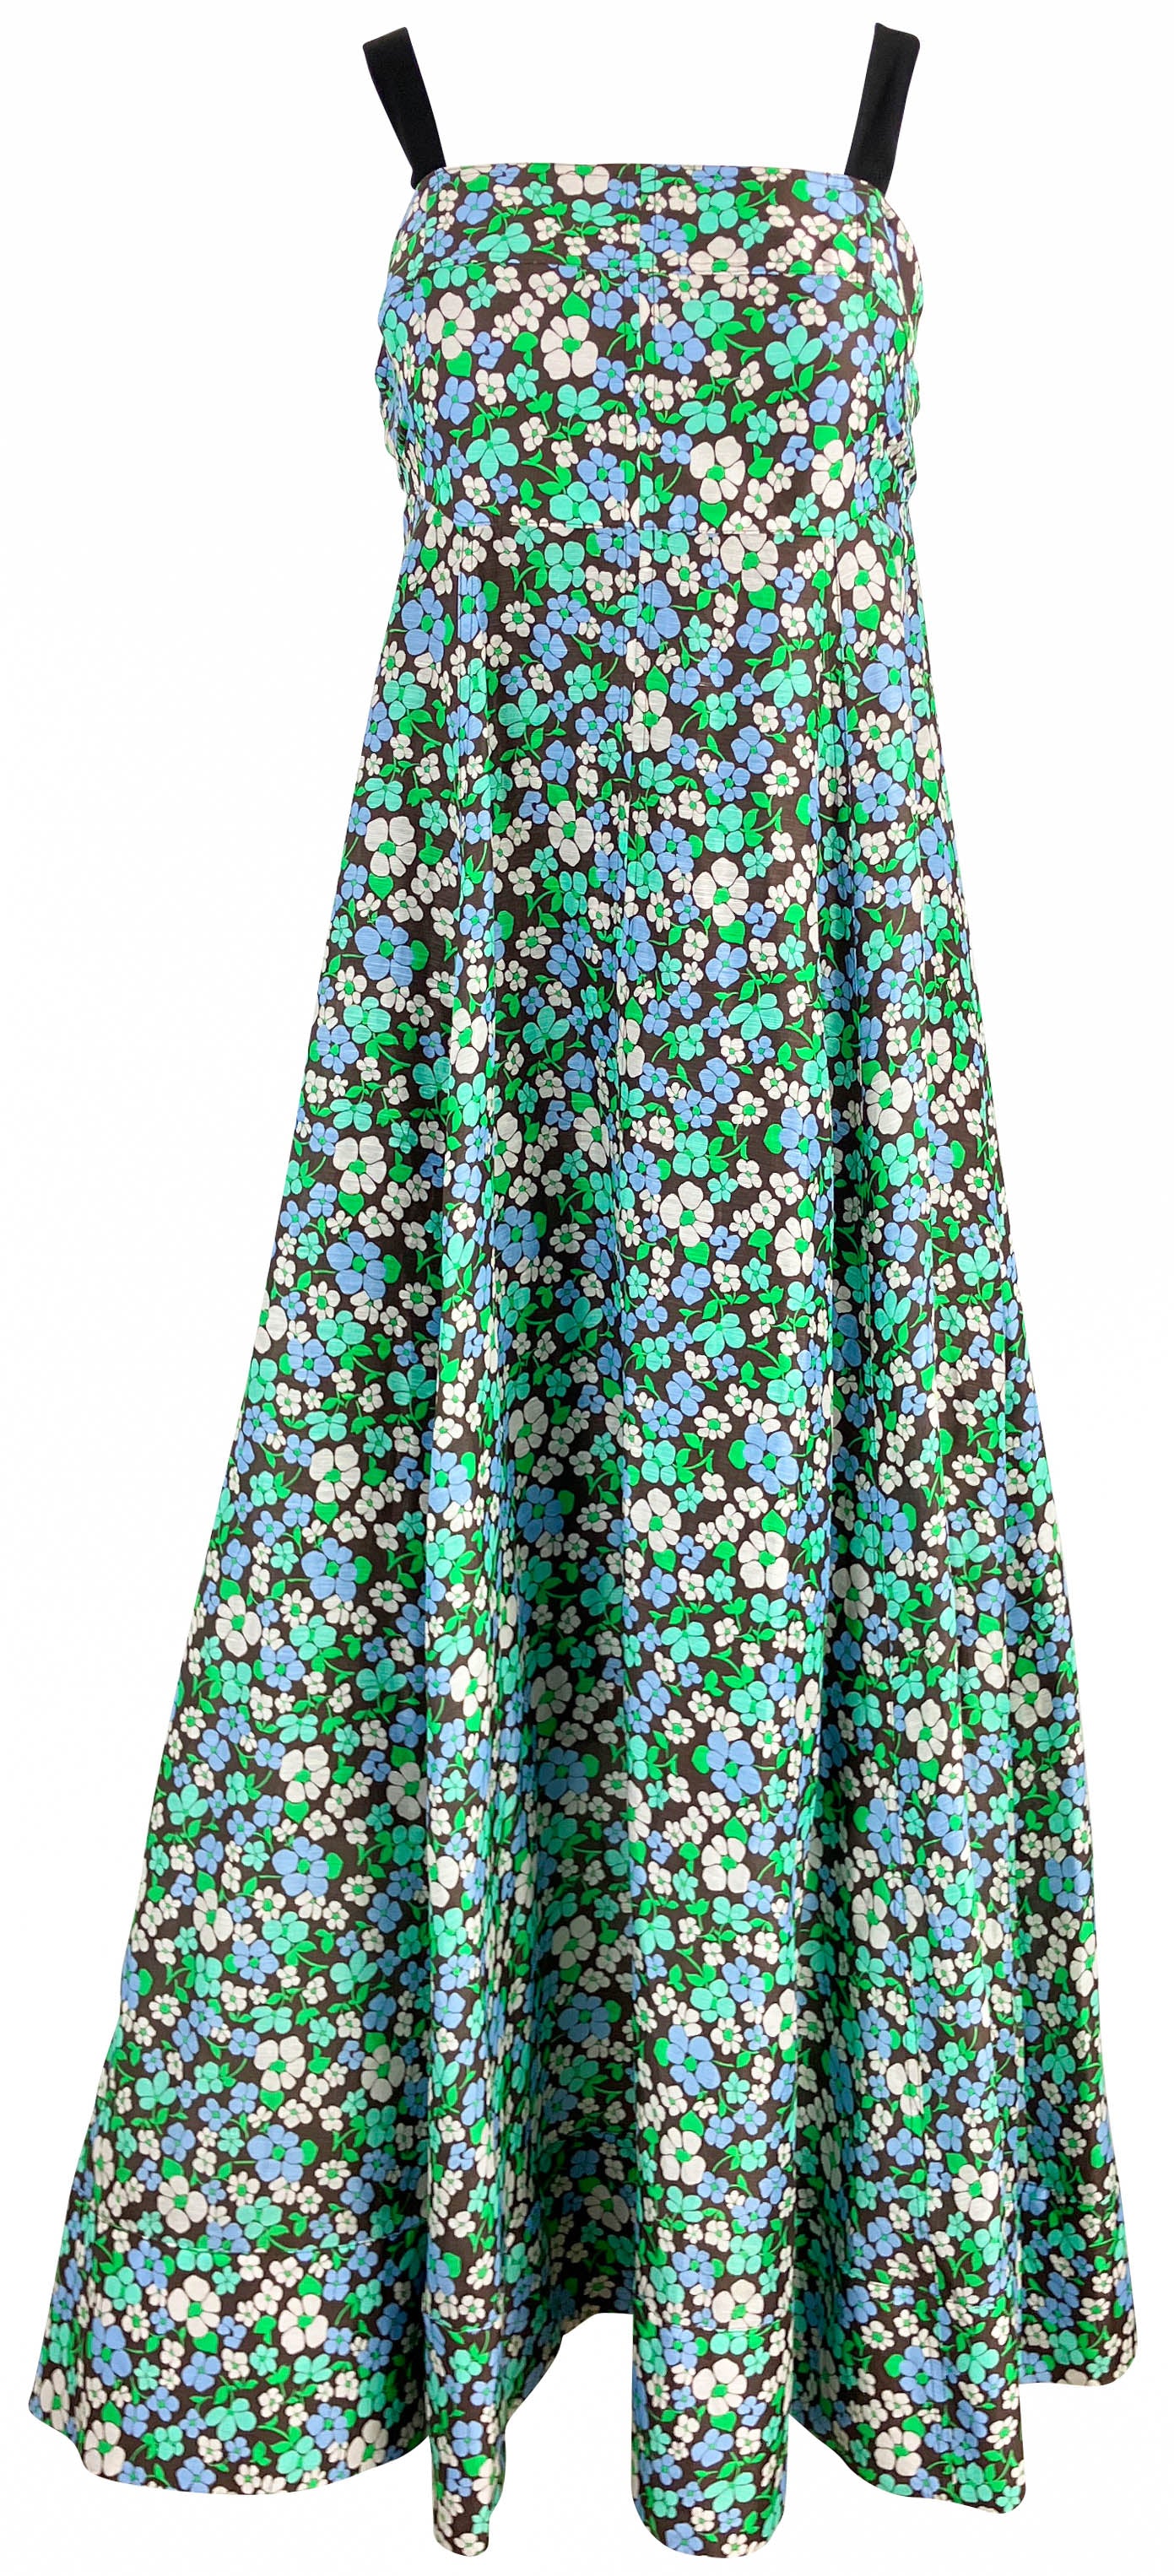 Lee Mathews Meadow Dress in Green Floral - Discounts on Lee Mathews at UAL